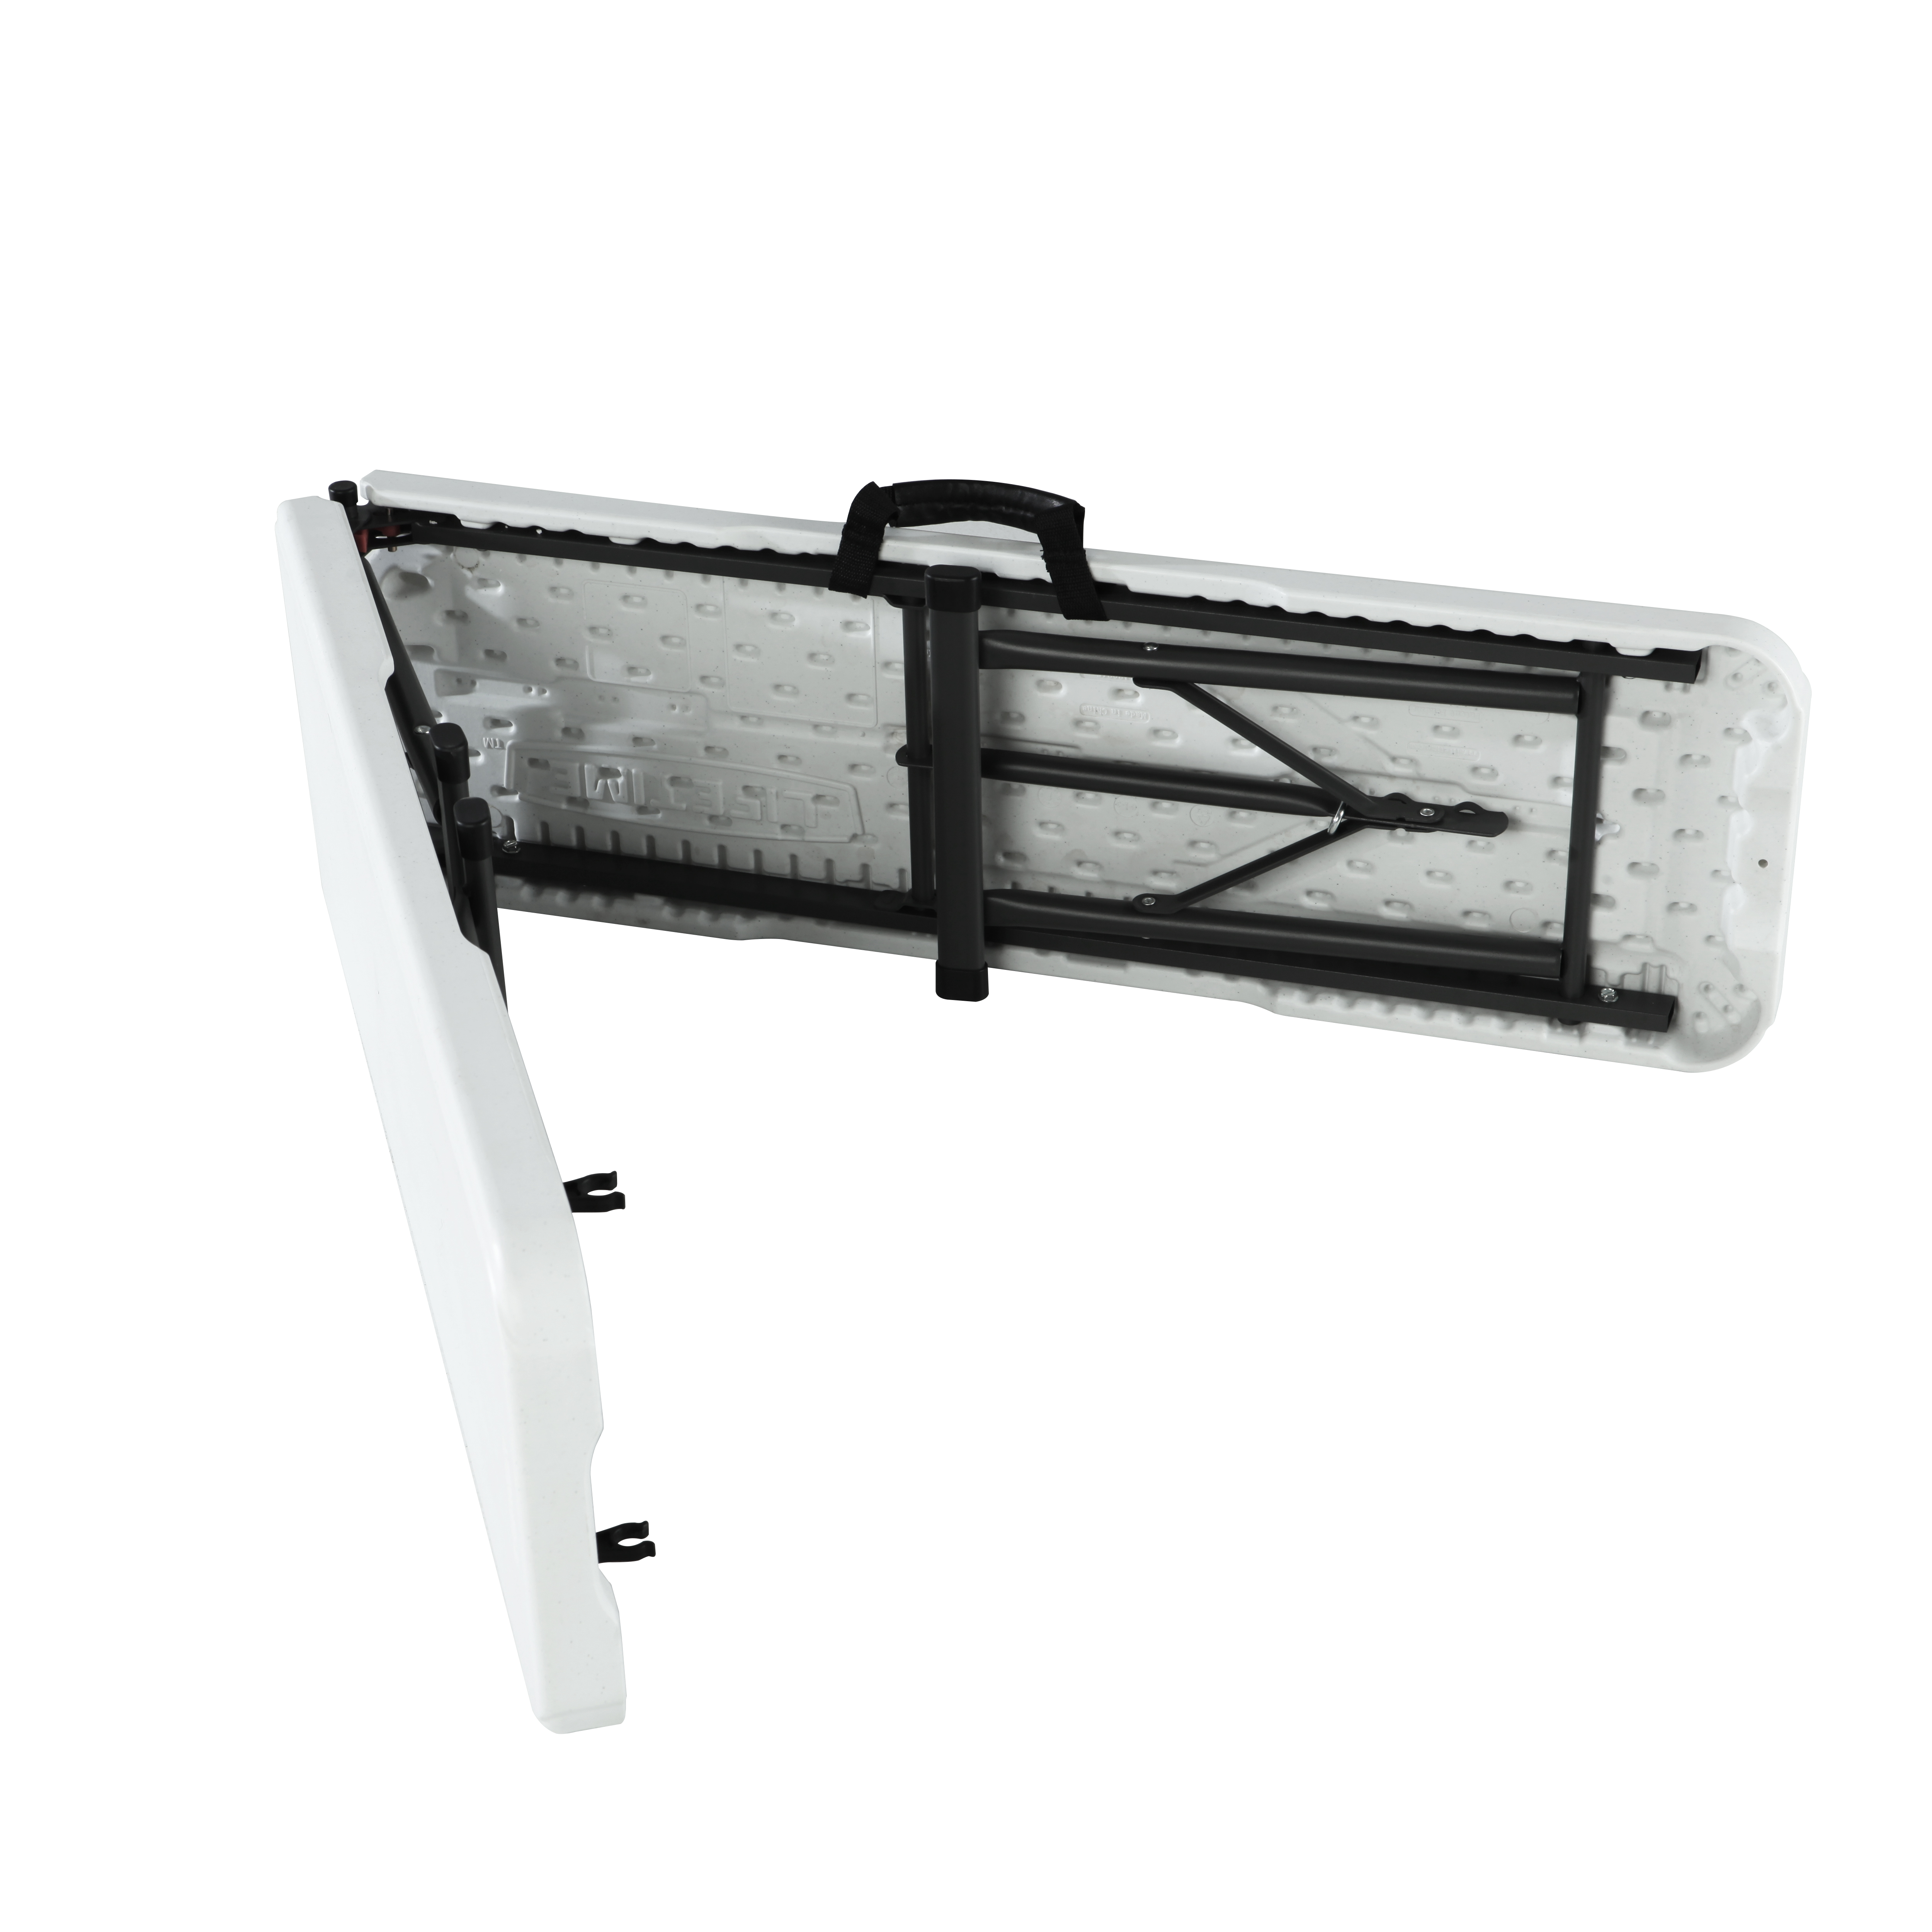 Fold-in-half bench (almond) /3-4 people